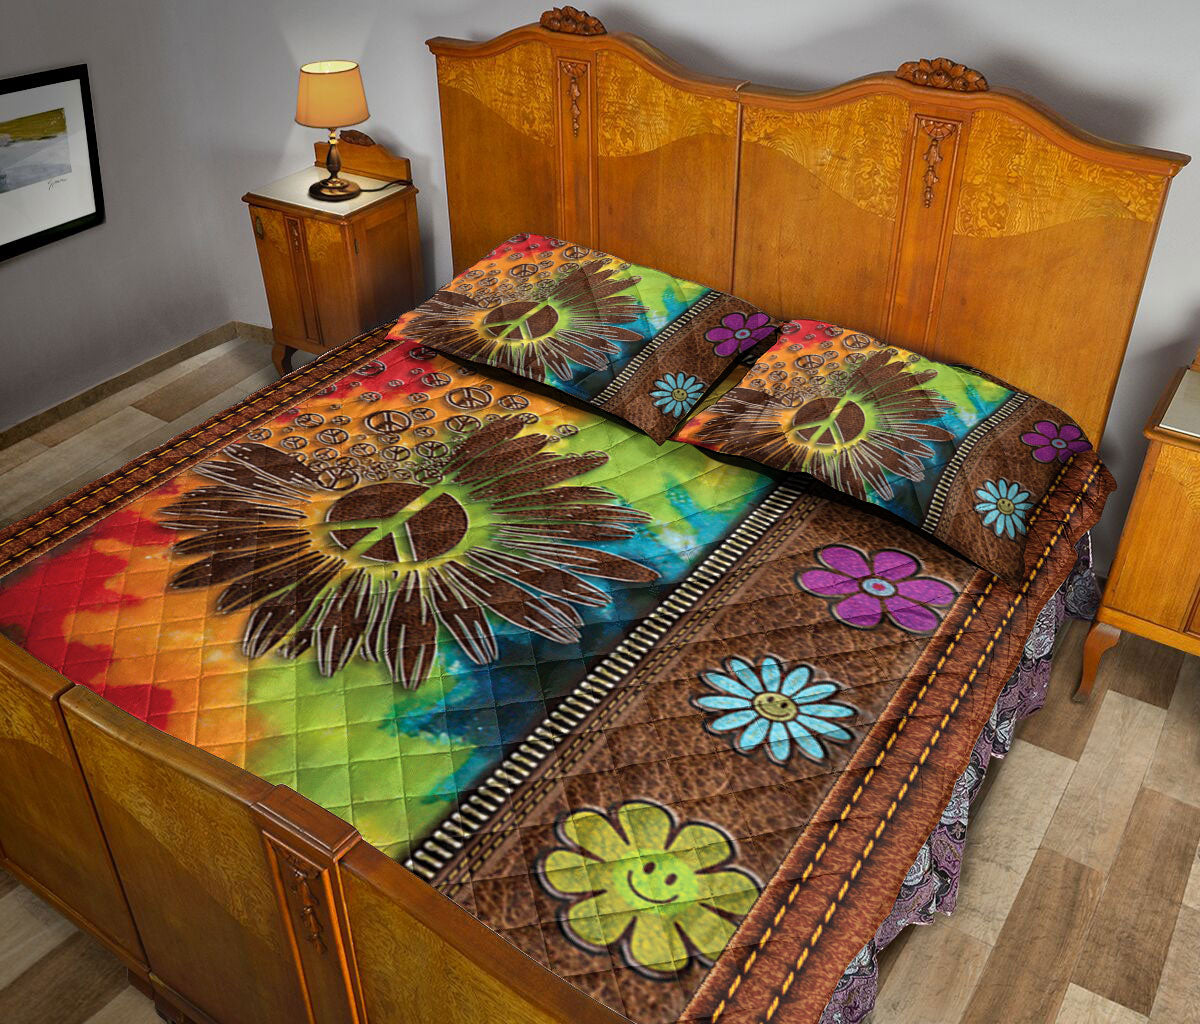 Ohaprints-Quilt-Bed-Set-Pillowcase-Daisy-Flower-Tie-Dye-Hippie-Peace-Sign-Floral-Brown-Pattern-Blanket-Bedspread-Bedding-1478-Queen (80'' x 90'')